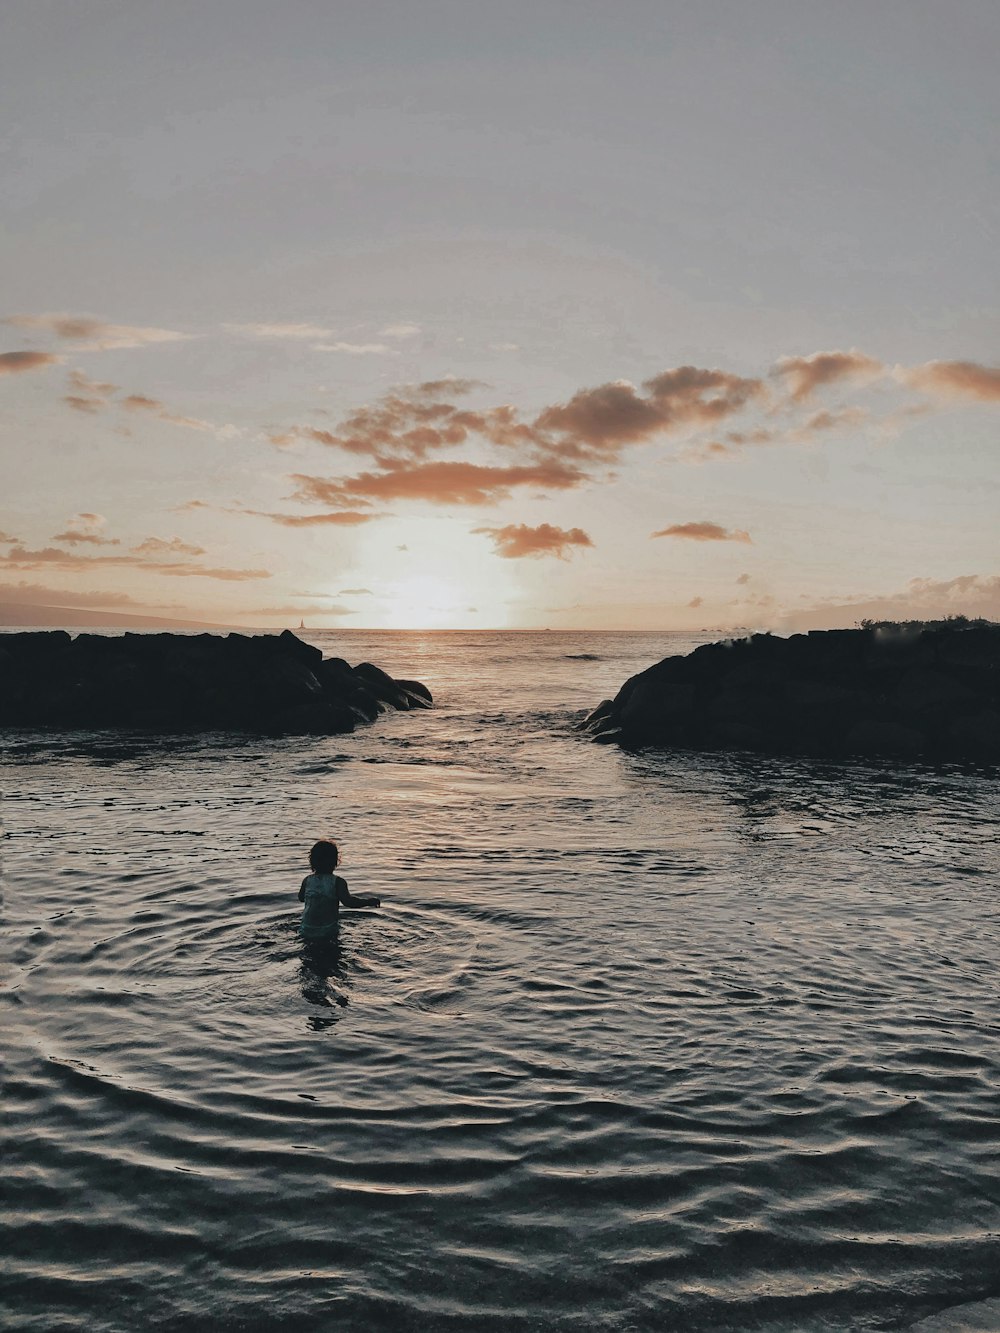 a person in a body of water at sunset